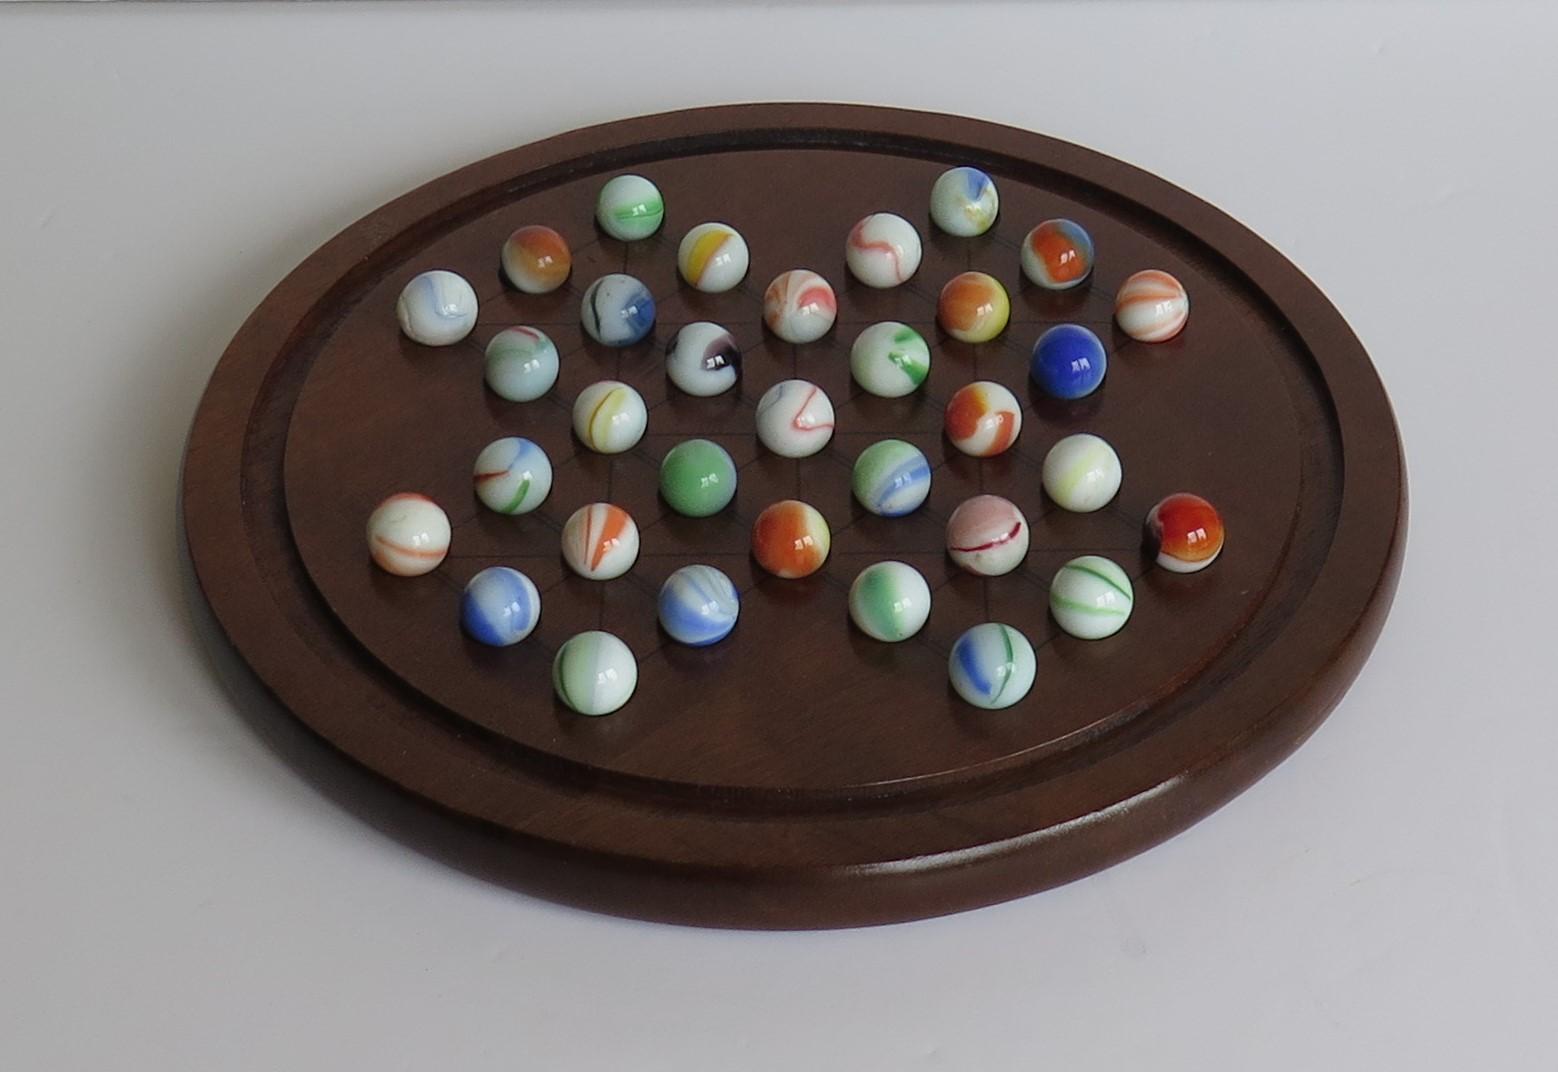 This is a good marble solitaire game, having a very good hardwood board and a complete set of 33 glass swirl marbles, all dating to the first half of the 20th century.

The circular turned board is made of hard-wood, possibly mahogany and has a